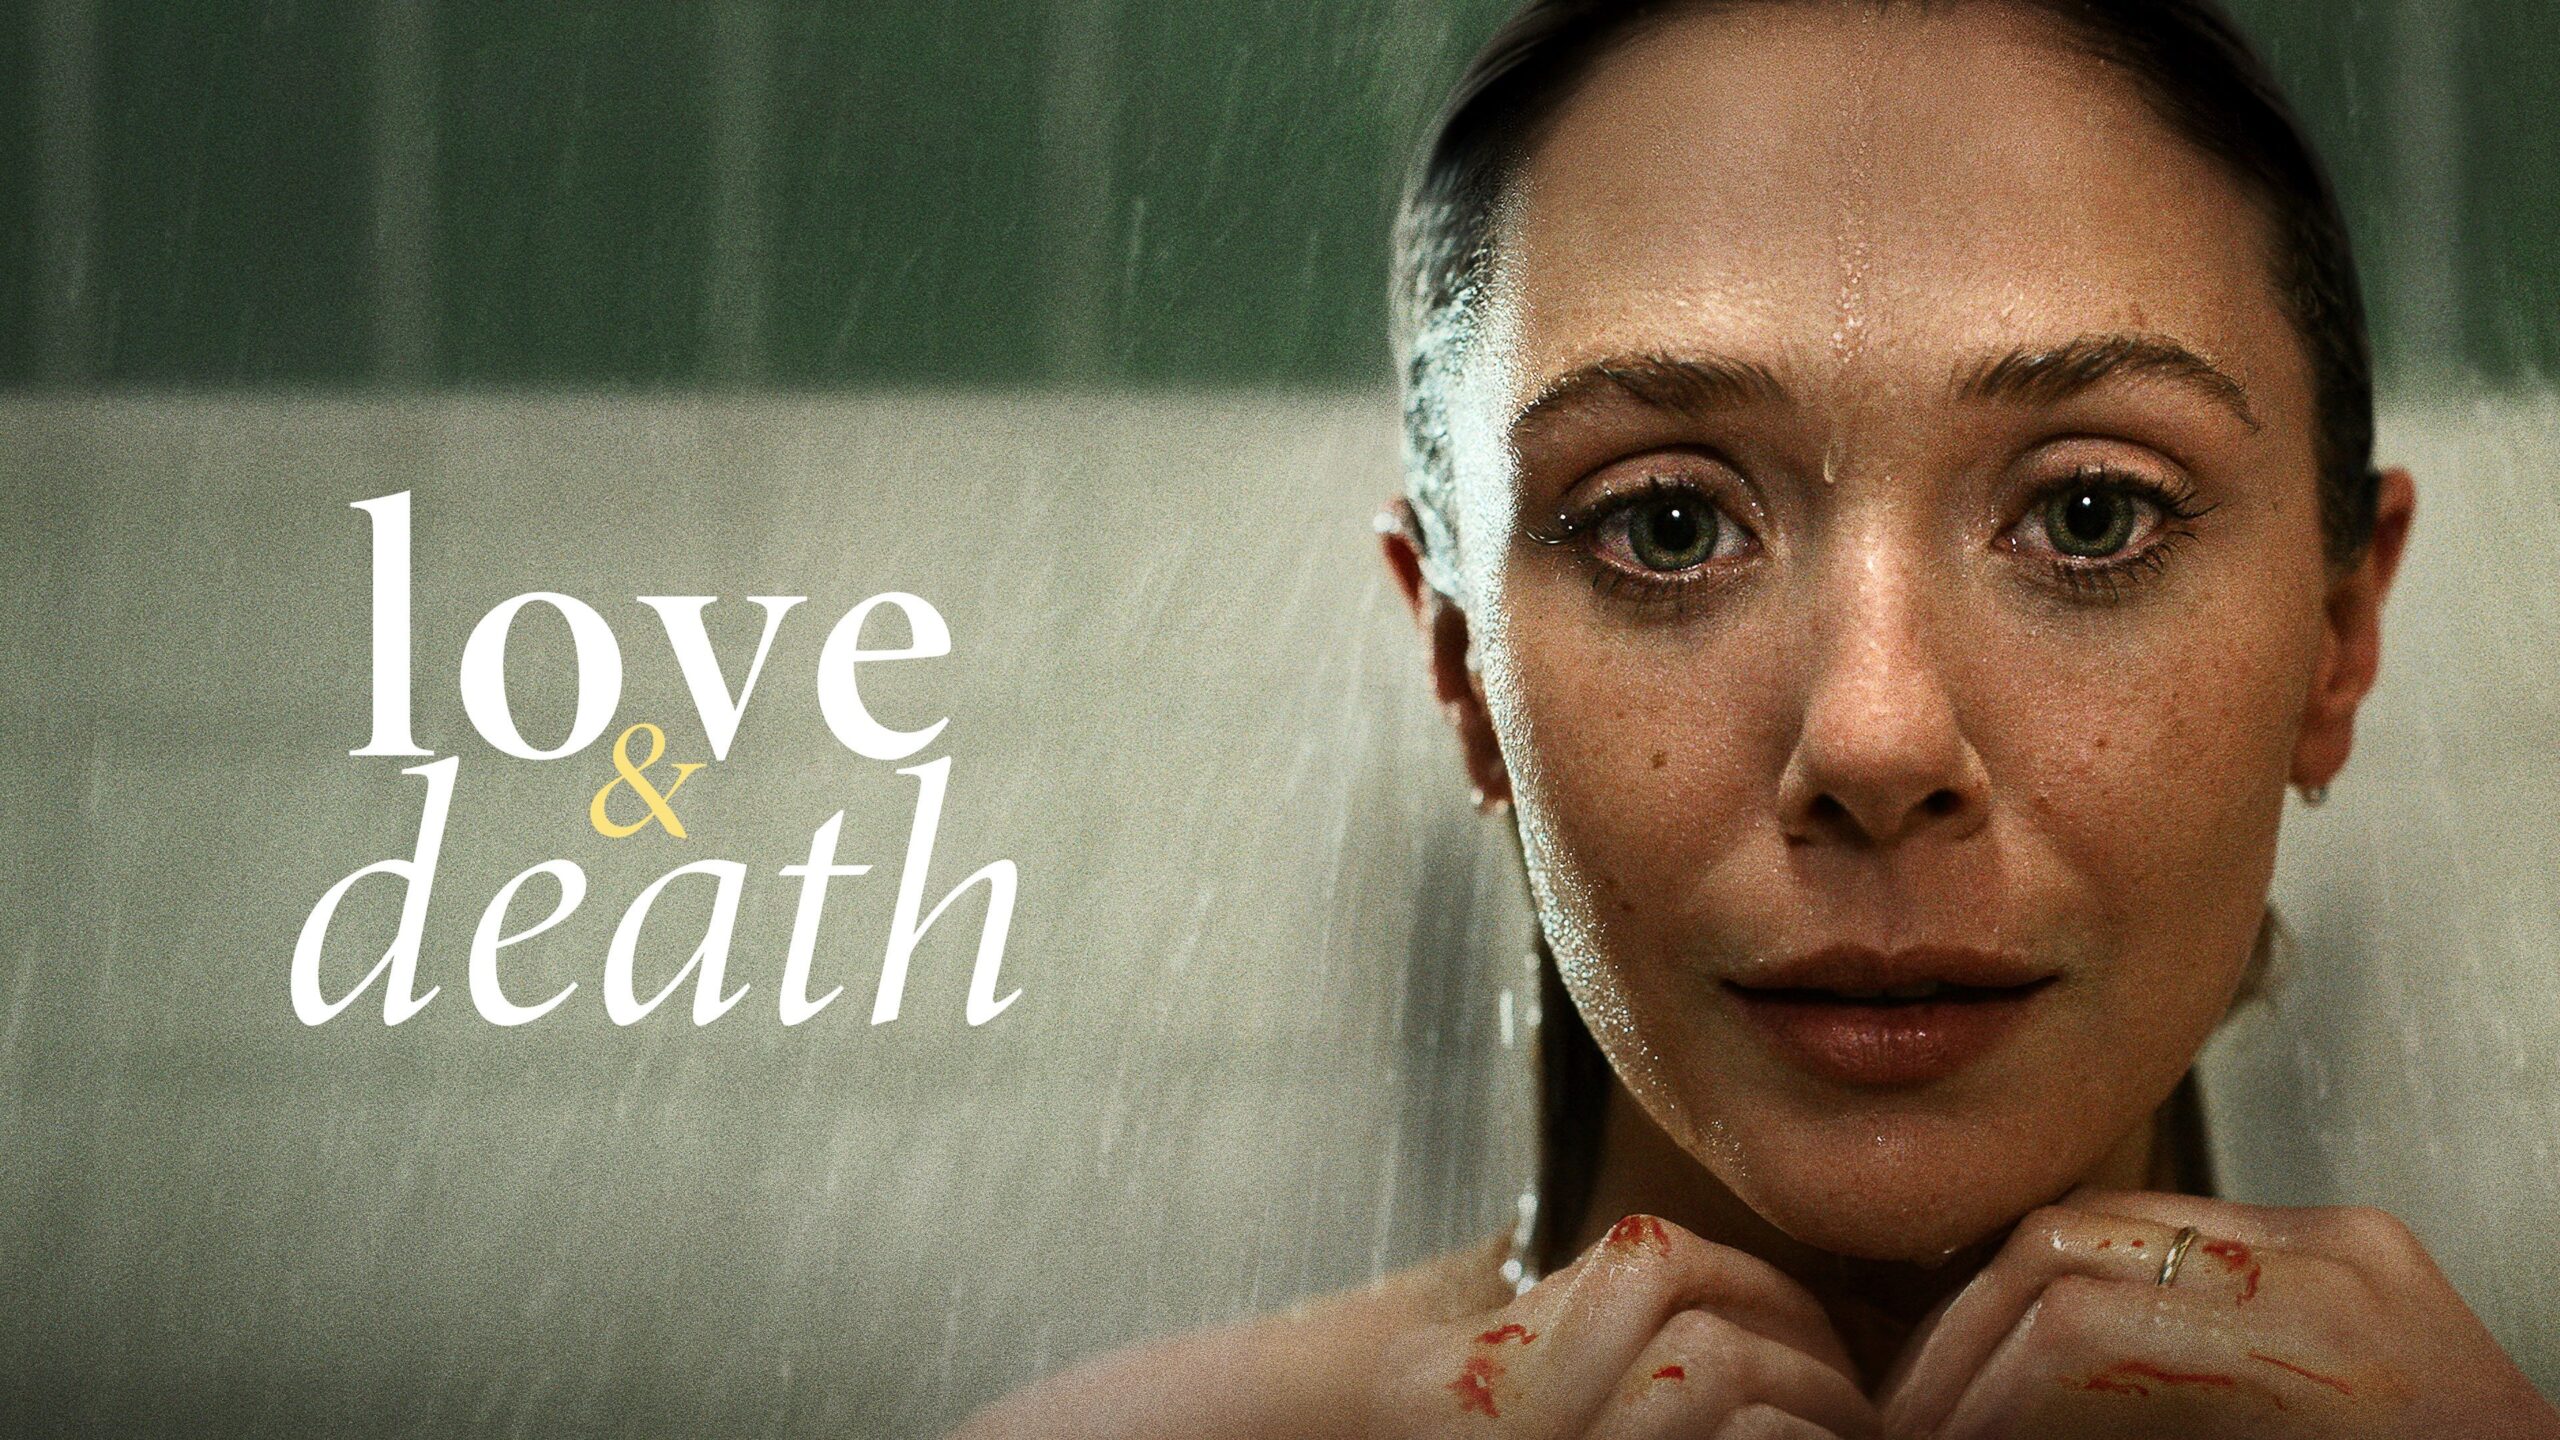 Creators and Cast on Love & Death